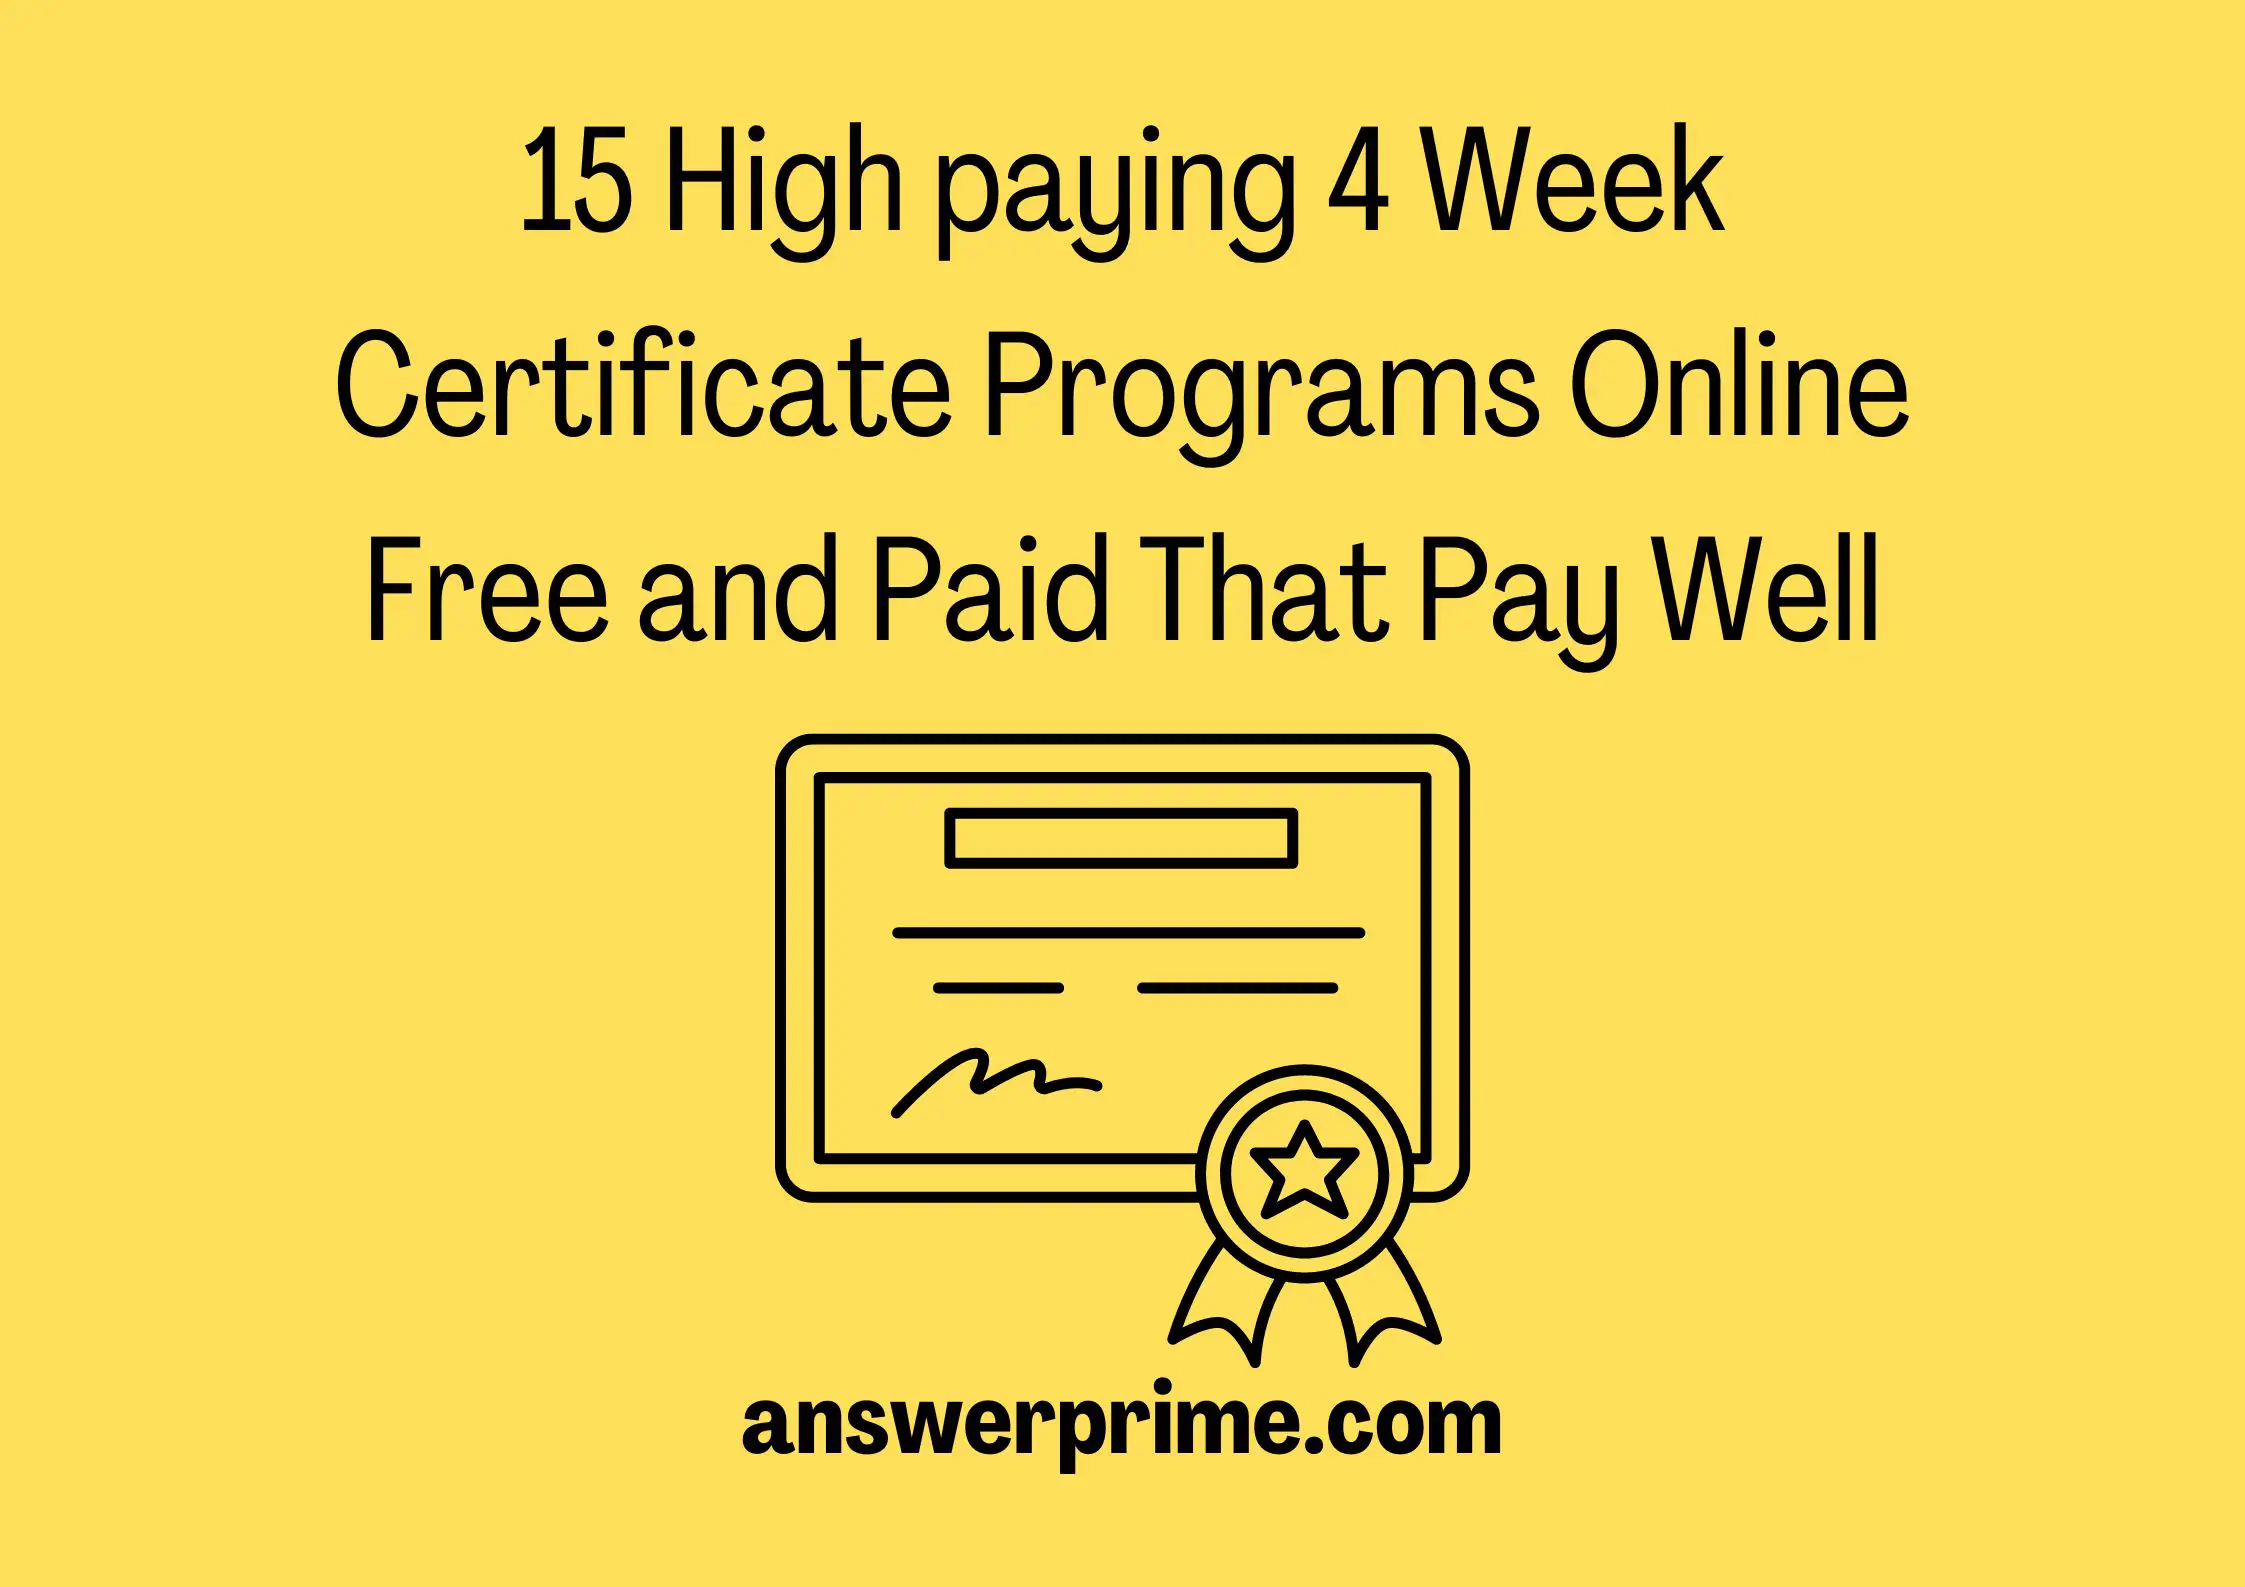 15 High paying 4 Week Certificate Programs Online Free and Paid That Pay Well